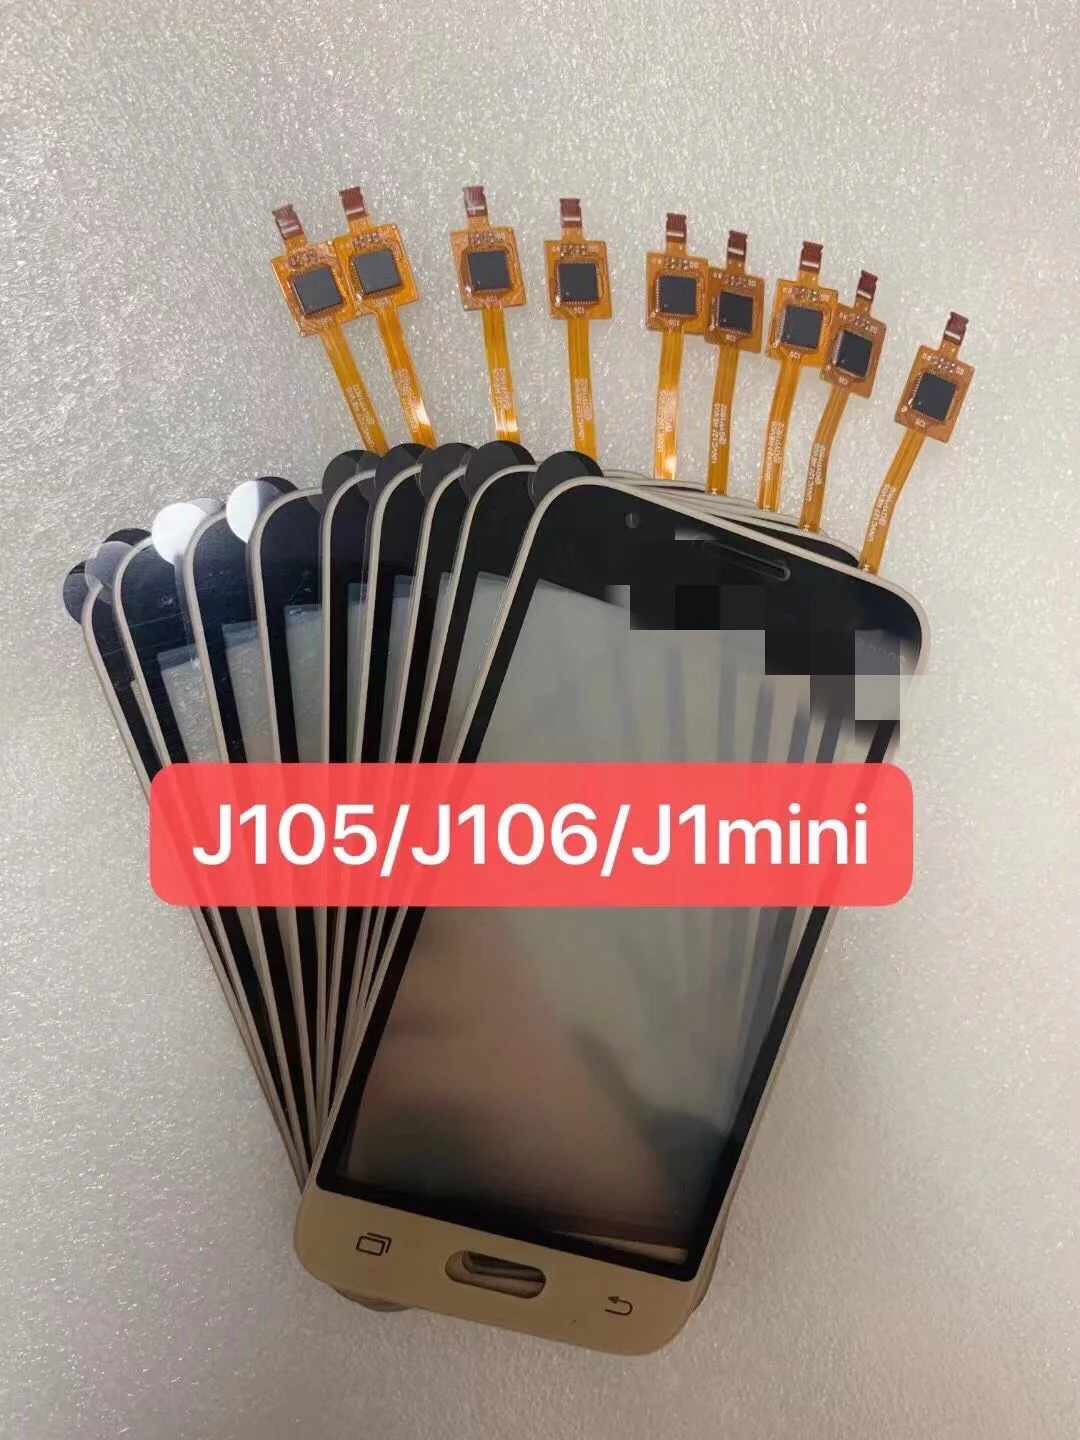 

50 PCS Touch Screen Panel For Samsung Galaxy J1 mini J105 J105H J105F J105B J105M SM-J105F Sensor Touch Screen Digitizer Parts